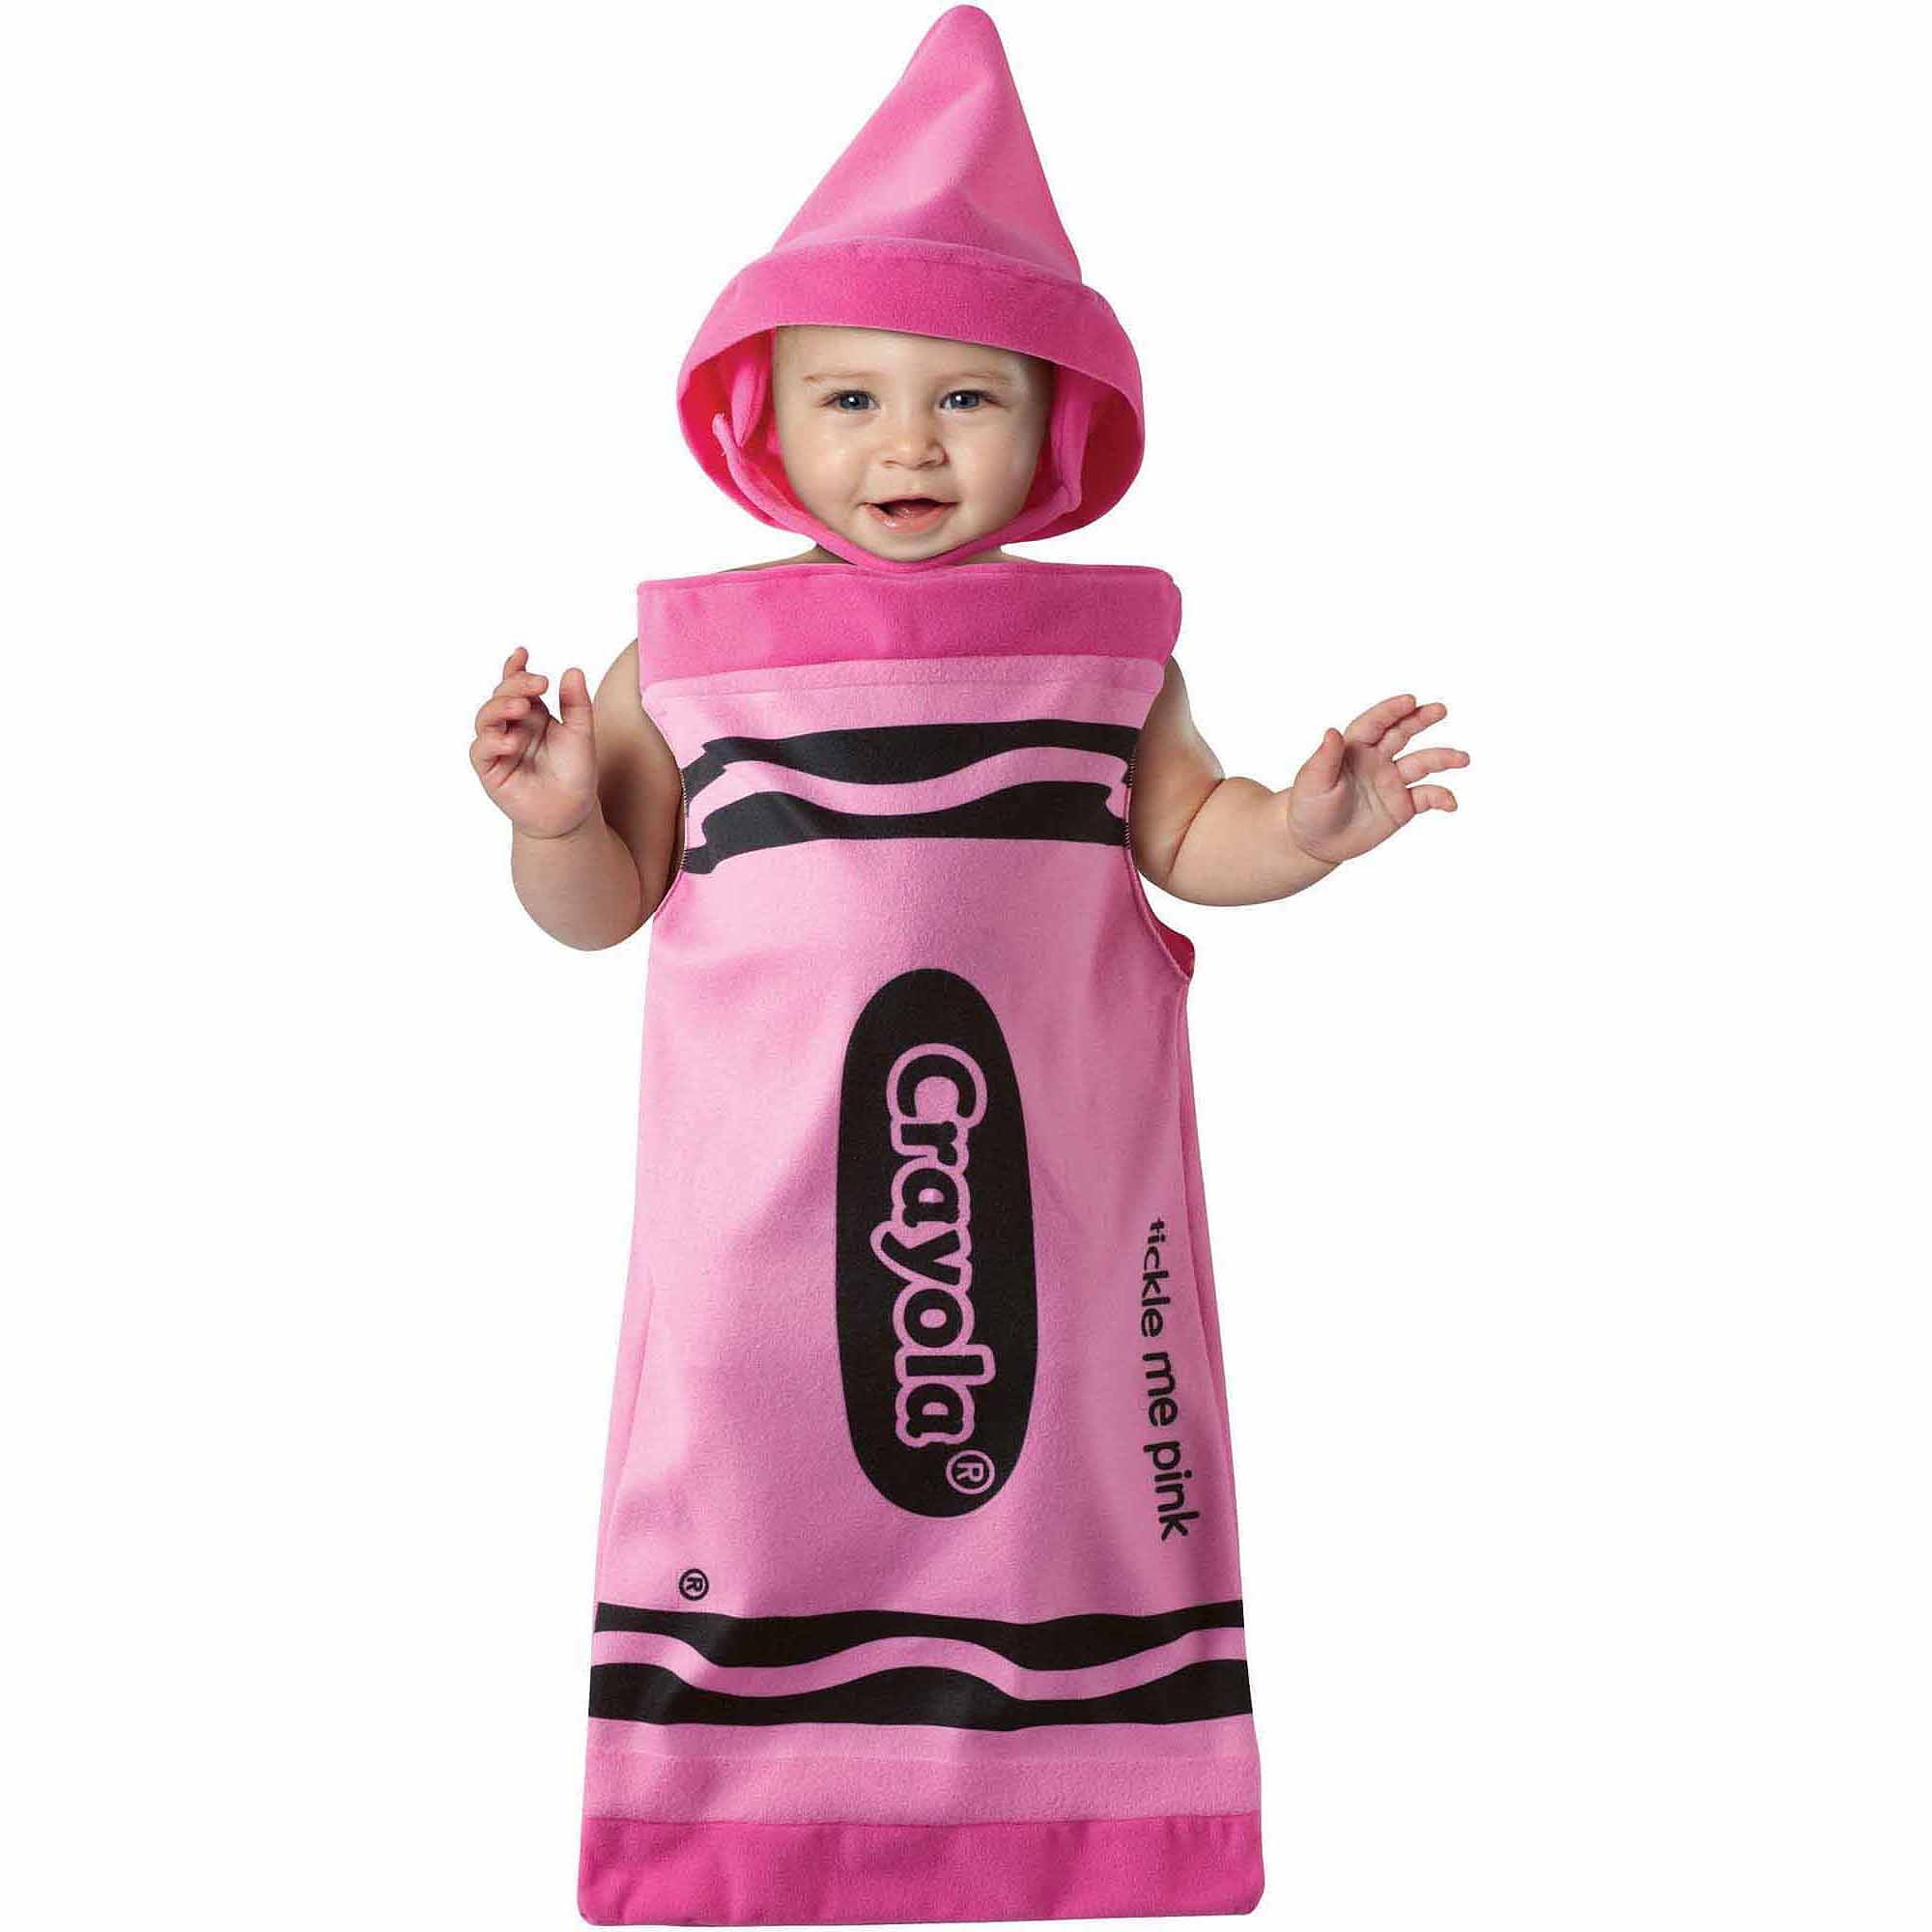 Crayola Tickle Me Pink Crayon Bunting Infant Halloween Costume, Size 0-6  Months 